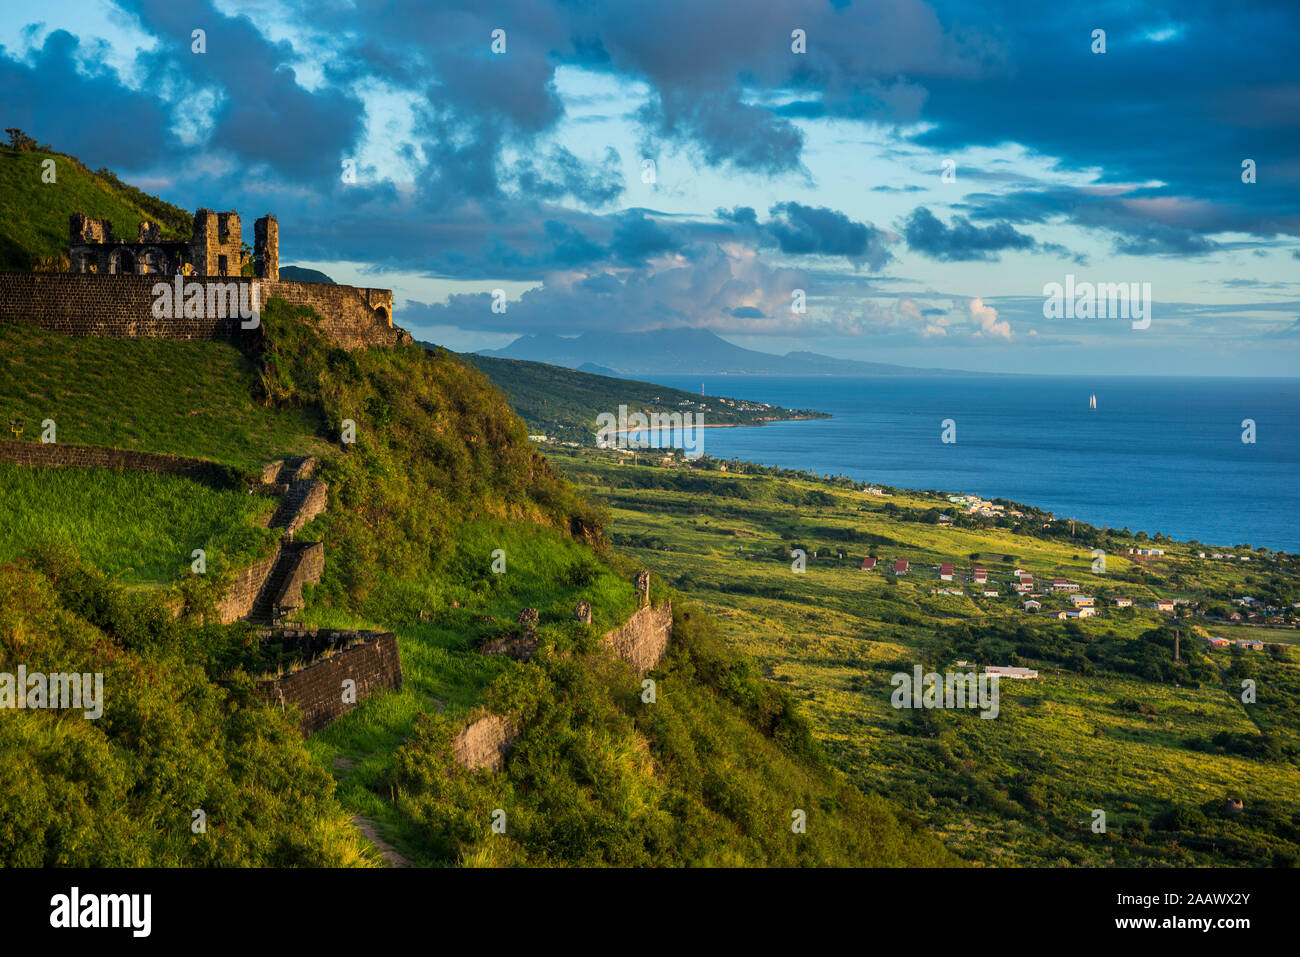 View of Brimstone hill fortress by sea against sky, St. Kitts and Nevis, Caribbean Stock Photo